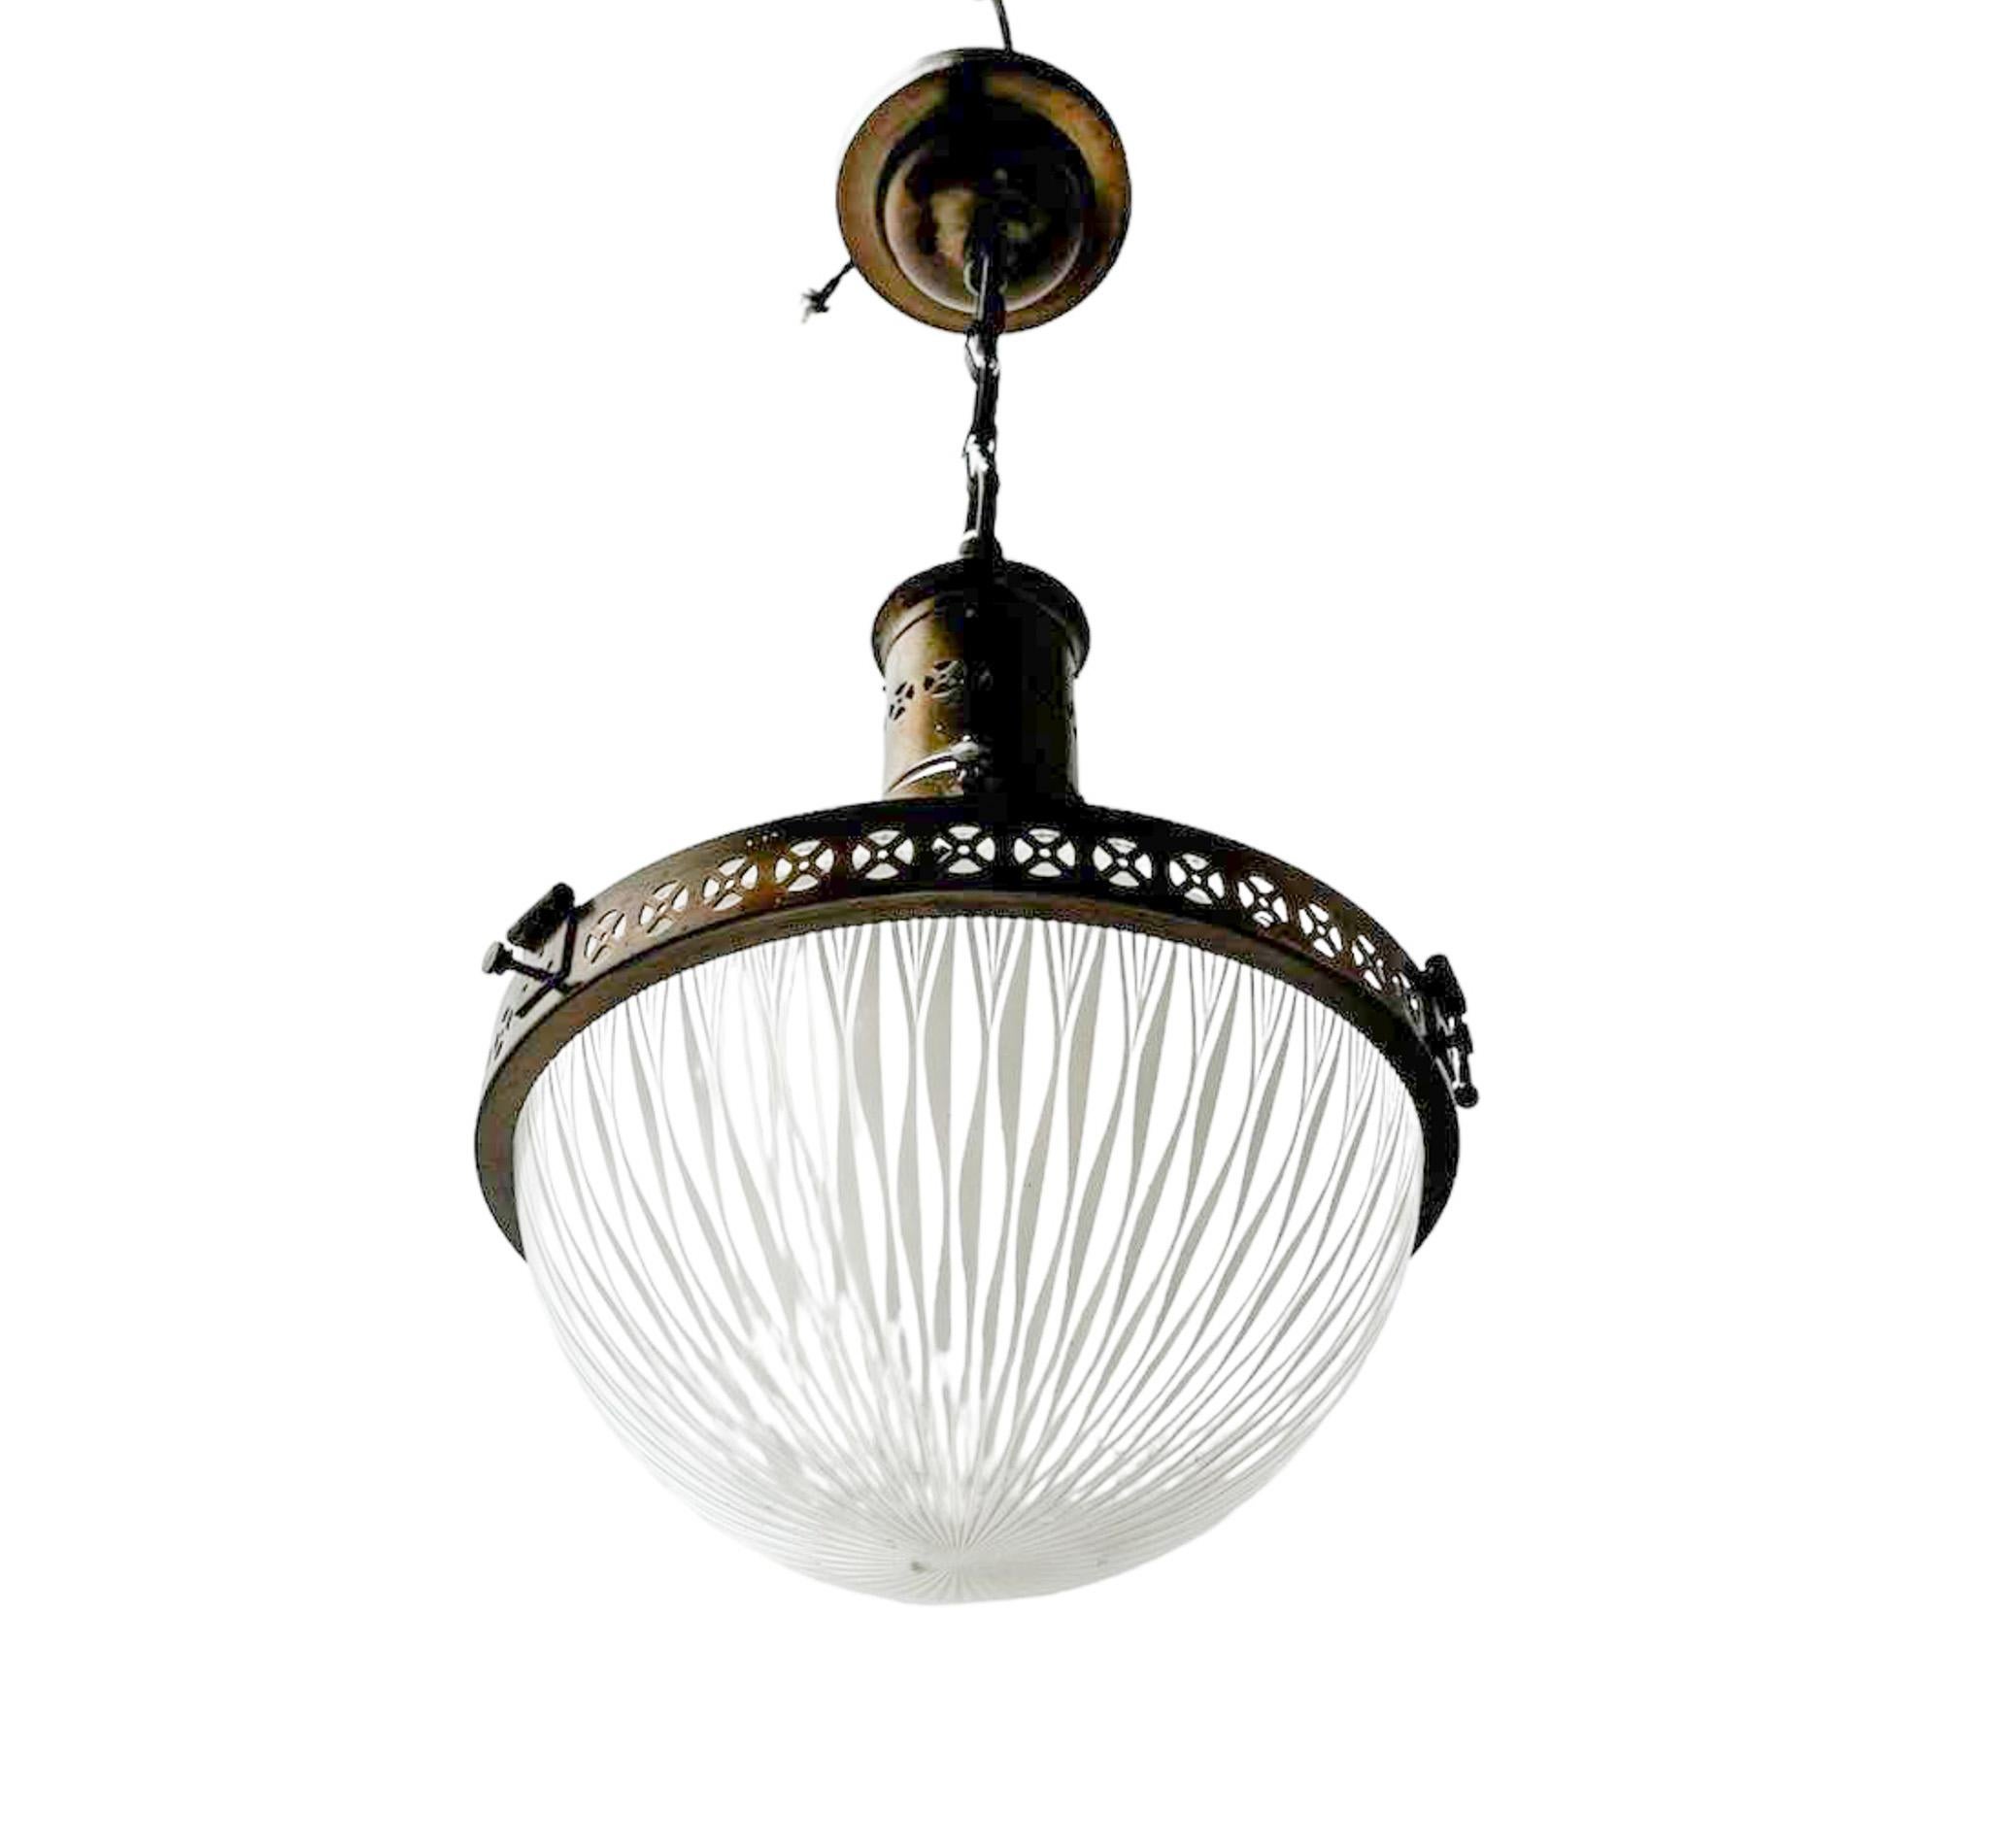 Stunning and elegant Arts & Crafts pendant light.
Design by Holophane.
Striking English design from the 1900s.
Original patinated brass holder and canopy with the original patinated brass chain.
Original prismatic glass and straight lined glass